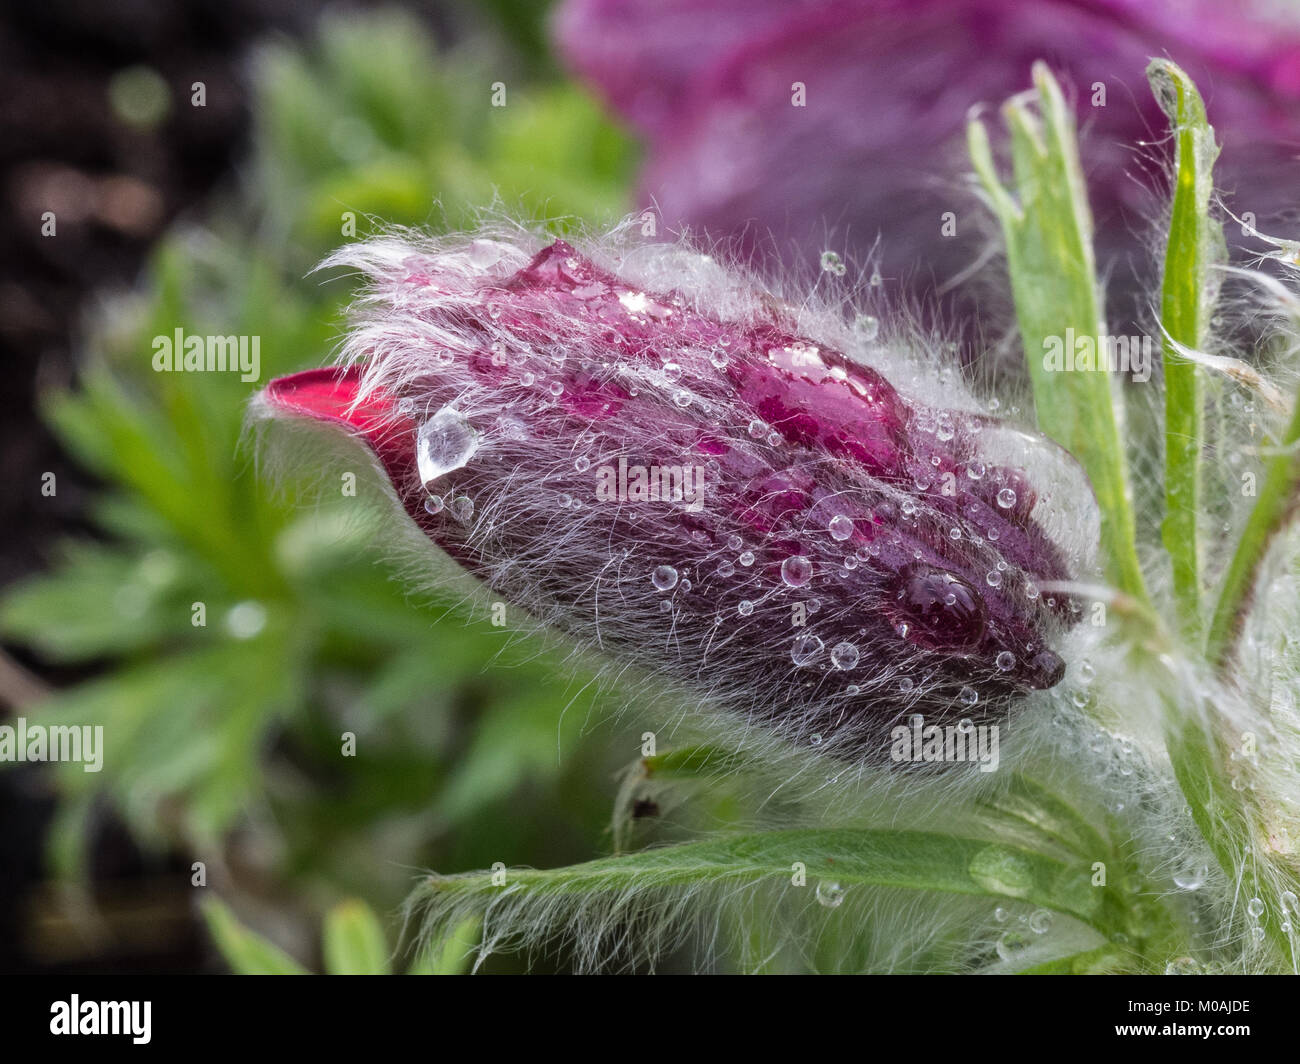 Close up of the deep red flower bud of Pulsatilla vulgaris rubra with water droplets Stock Photo